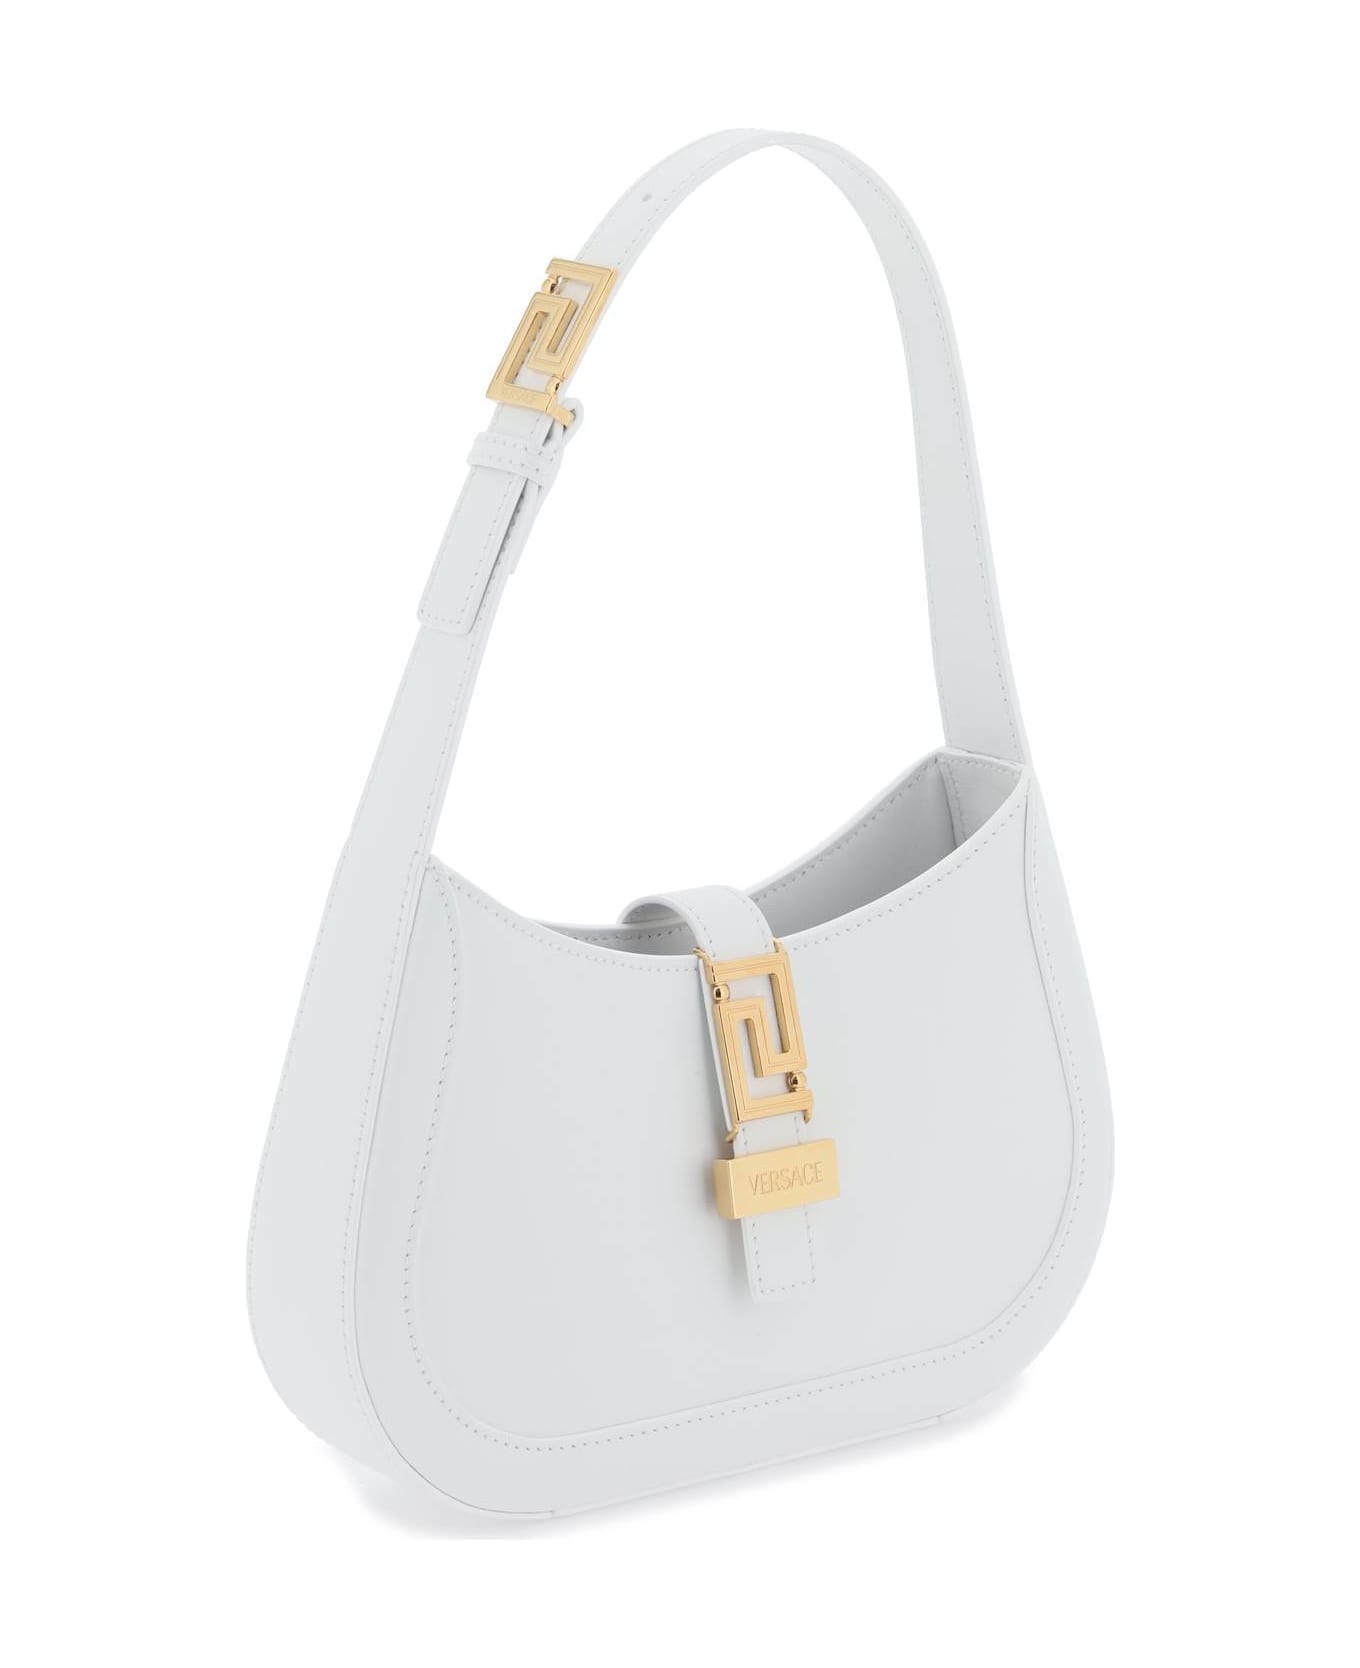 Versace White Leather Bag - White